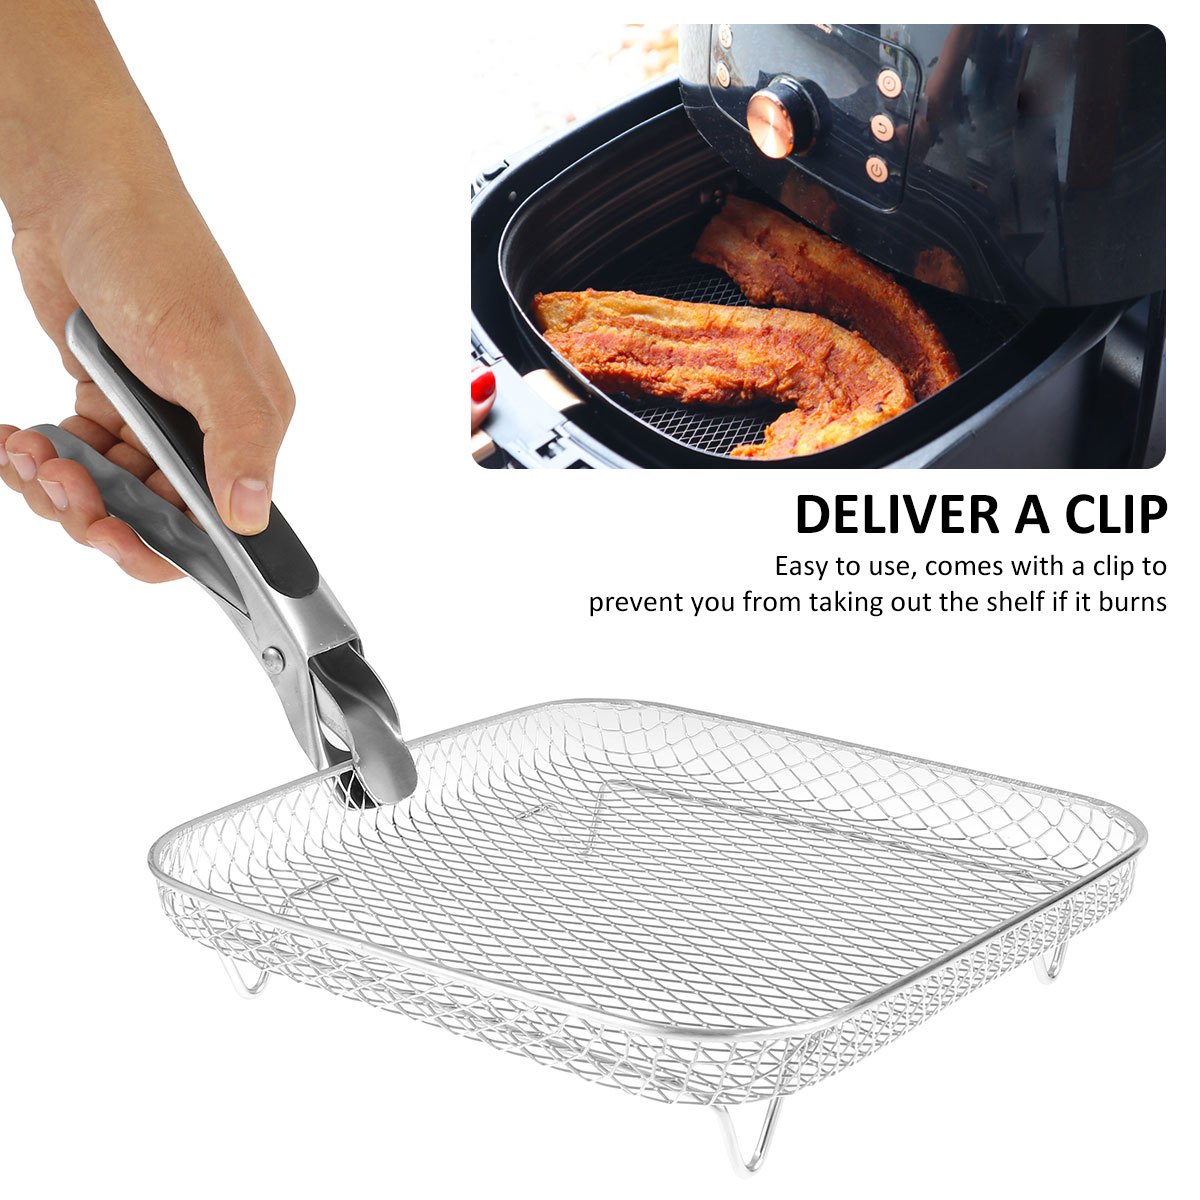 Air Fryer Rack For Dual Air Fryers | Airfryer Basket Tray | Air Fryer  Accessories, Dehydrator Racks Fit All Double Basket Air Fryer Cooling Drying